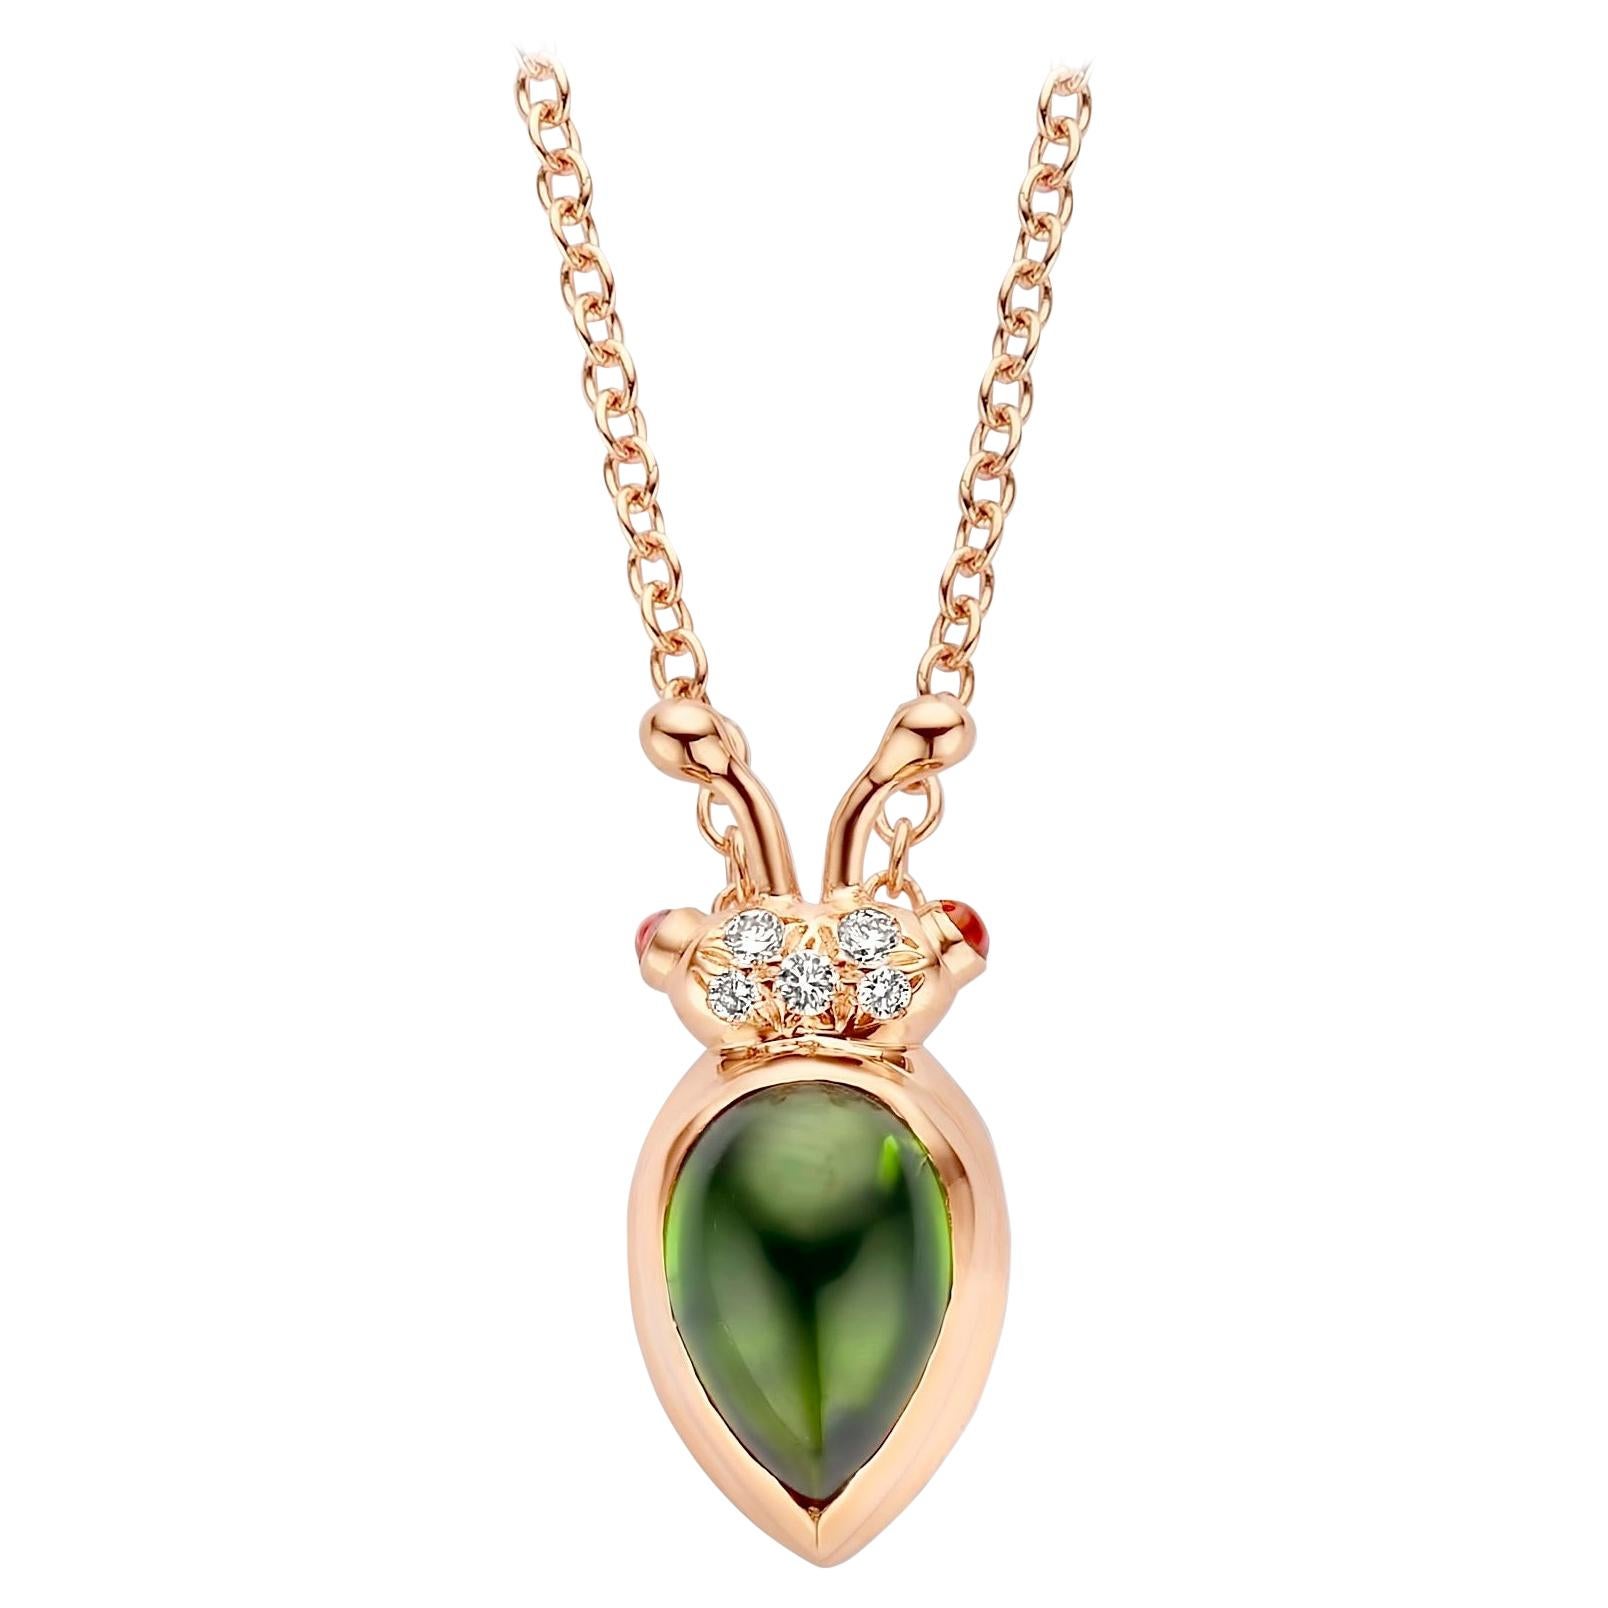 One of a kind lucky beetle necklace in 18K rose gold 6g created by jewelry designer Celine Roelens. This necklace is set with the finest diamonds in brilliant cut 0,04Ct (VVS/DEF quality) and one natural, green tourmaline in pear cabouchon cut